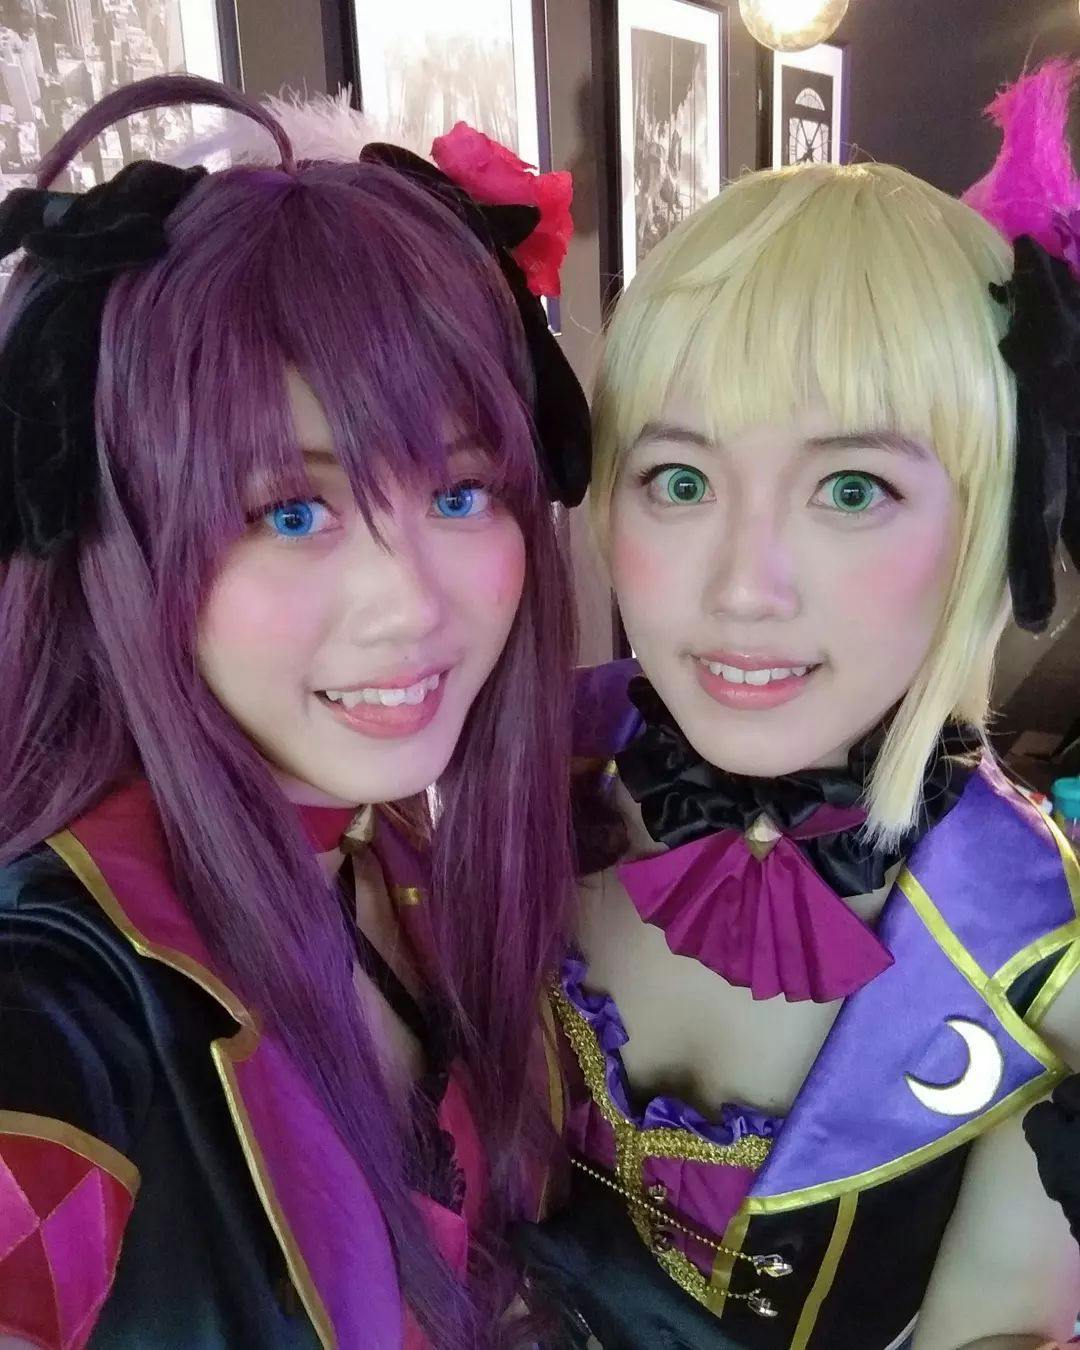 Midori and Mitsuki, Malaysian makers who specialize in cosplay commissions.